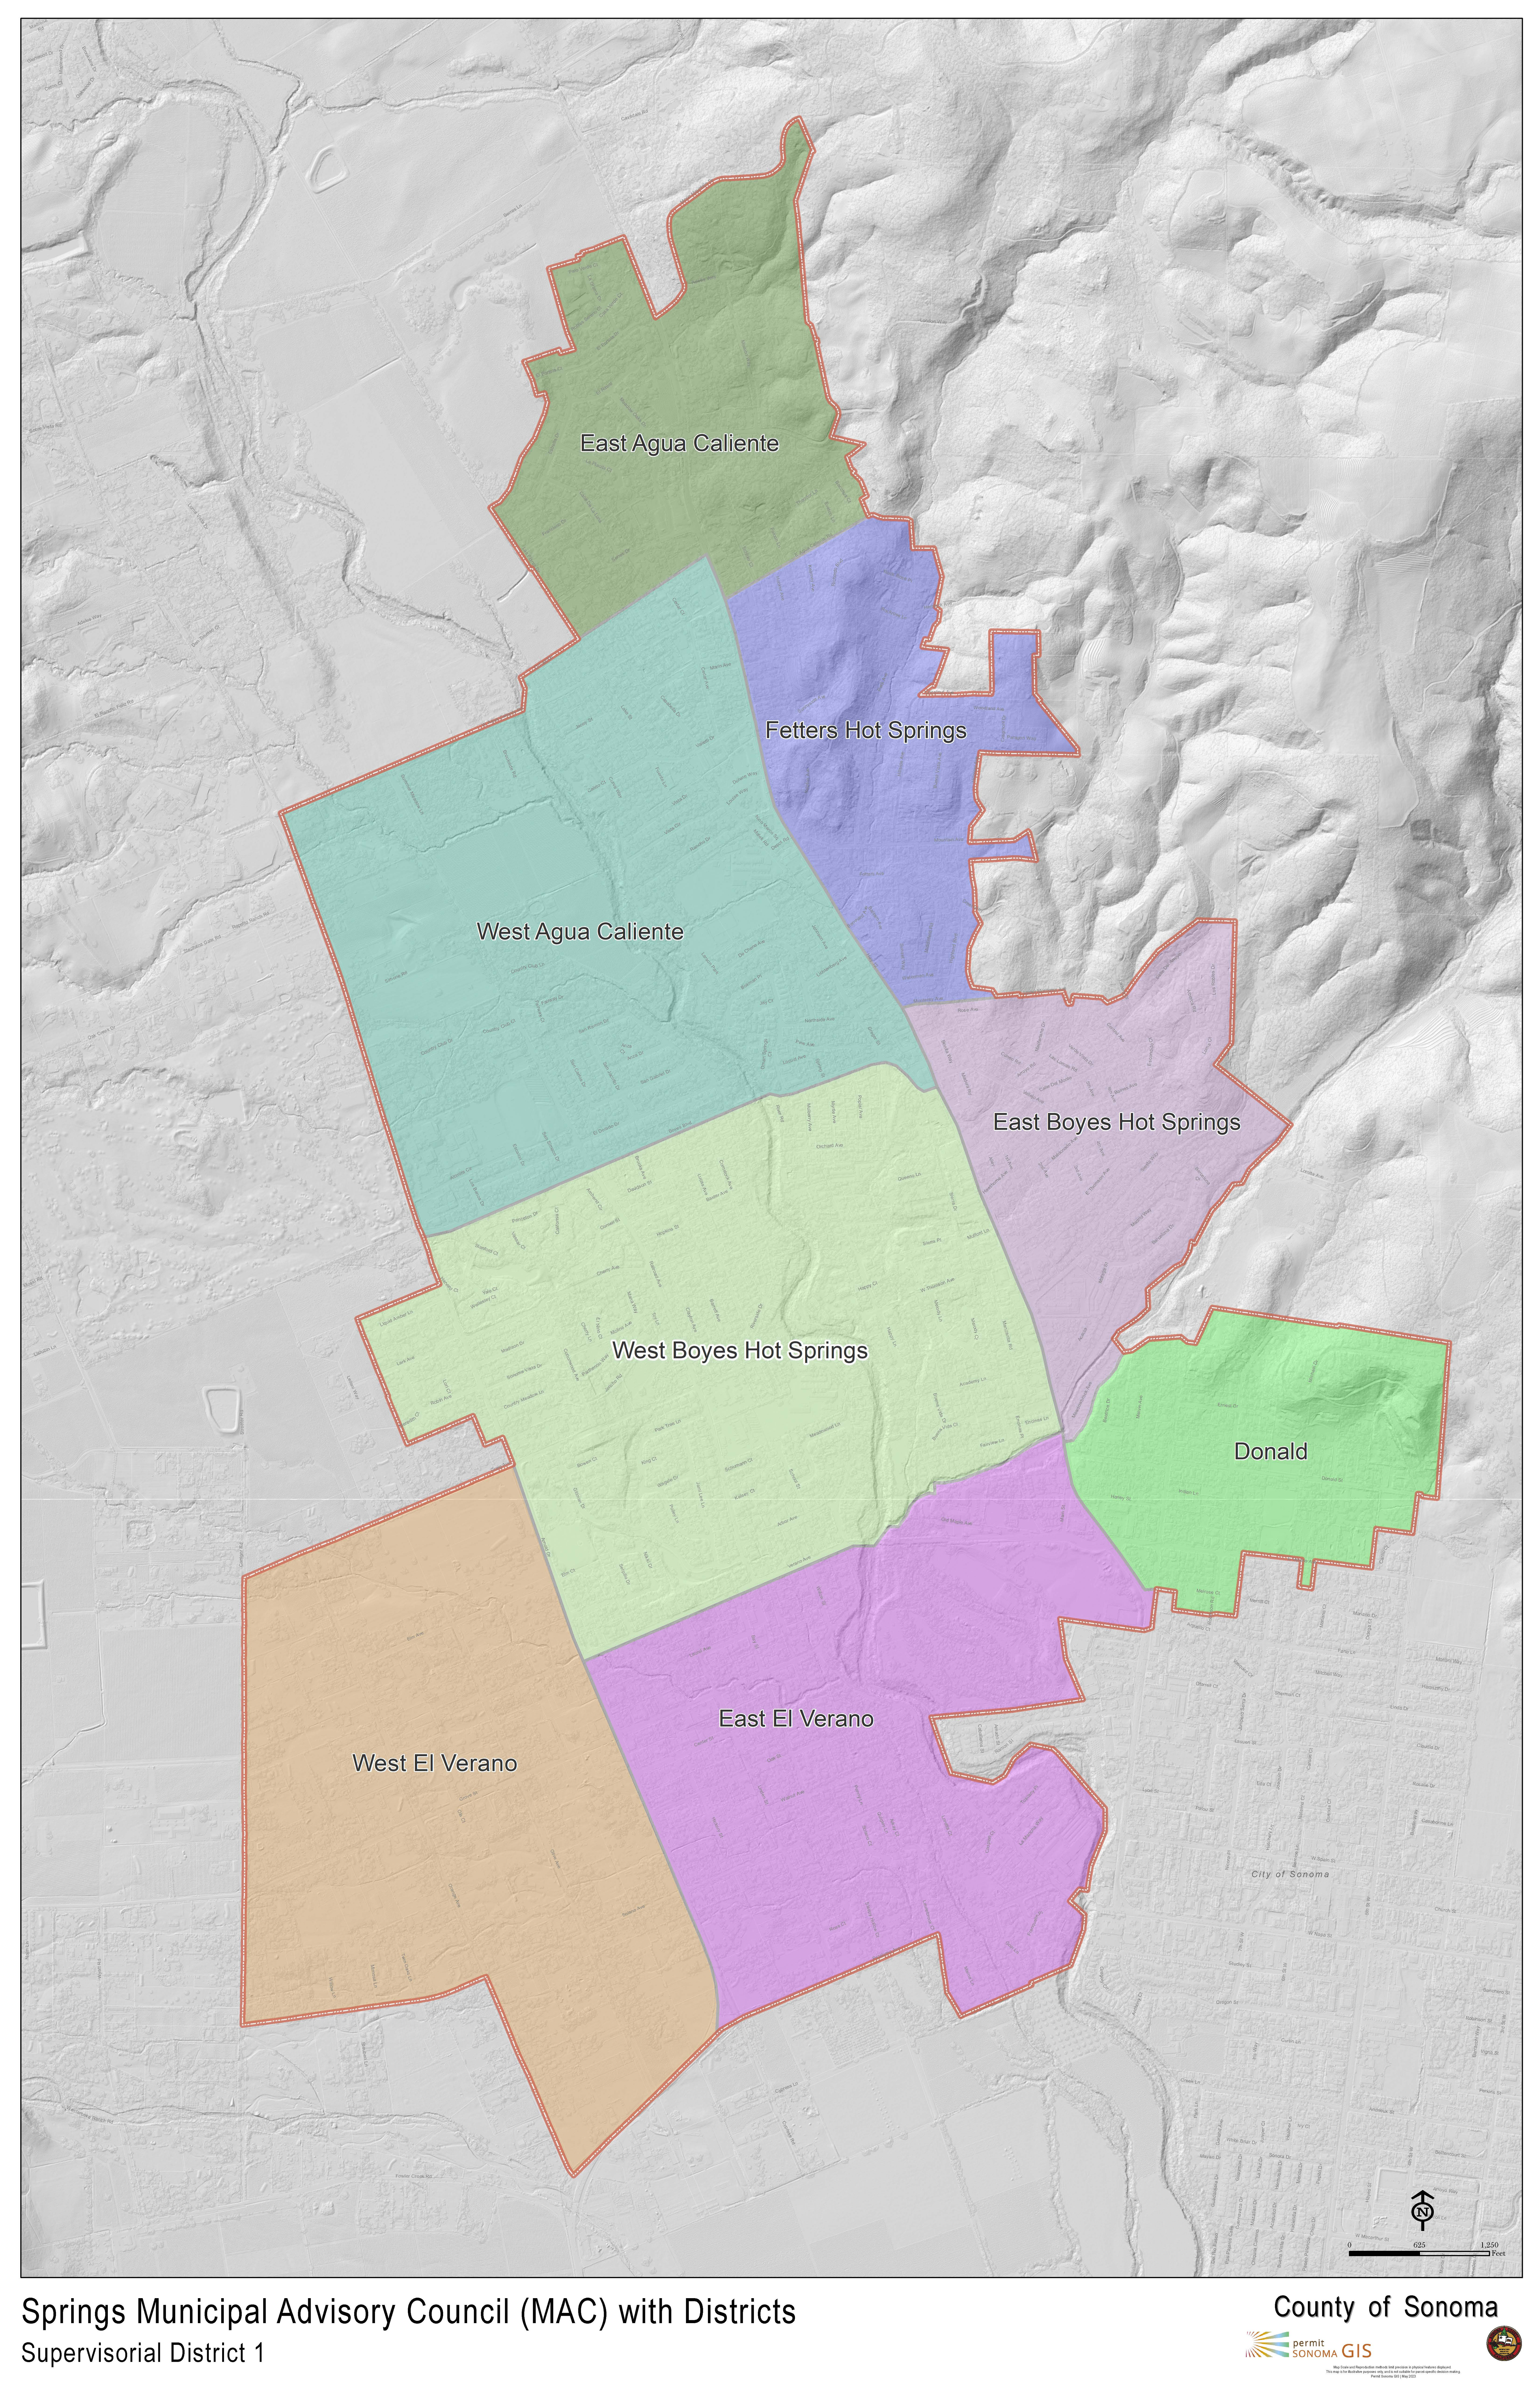 District map of the Springs Municipal Advisory Council (MAC) area in Supervisorial District 1. Going clockwise from the top, the discticts are East Agua Caliente, Fetters Hot Springs, East Boyes Hot Springs, Donald, East El Verano, West El Verano, West Boyes Hot Springs, and West Agua Caliente.  